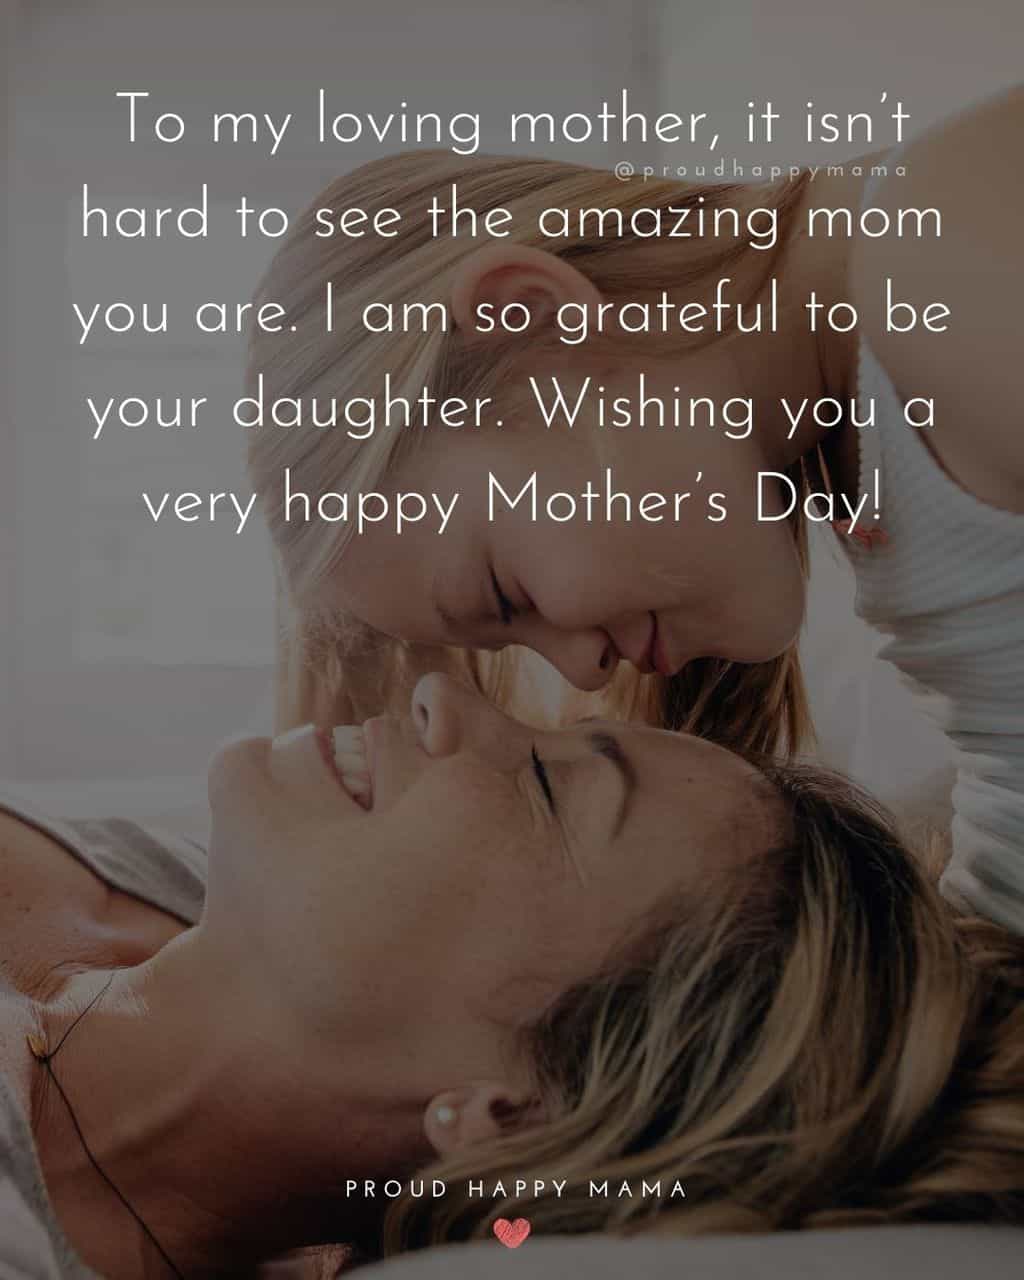 75+ Mother’s Day Quotes From Daughter to Warm Mom's Heart